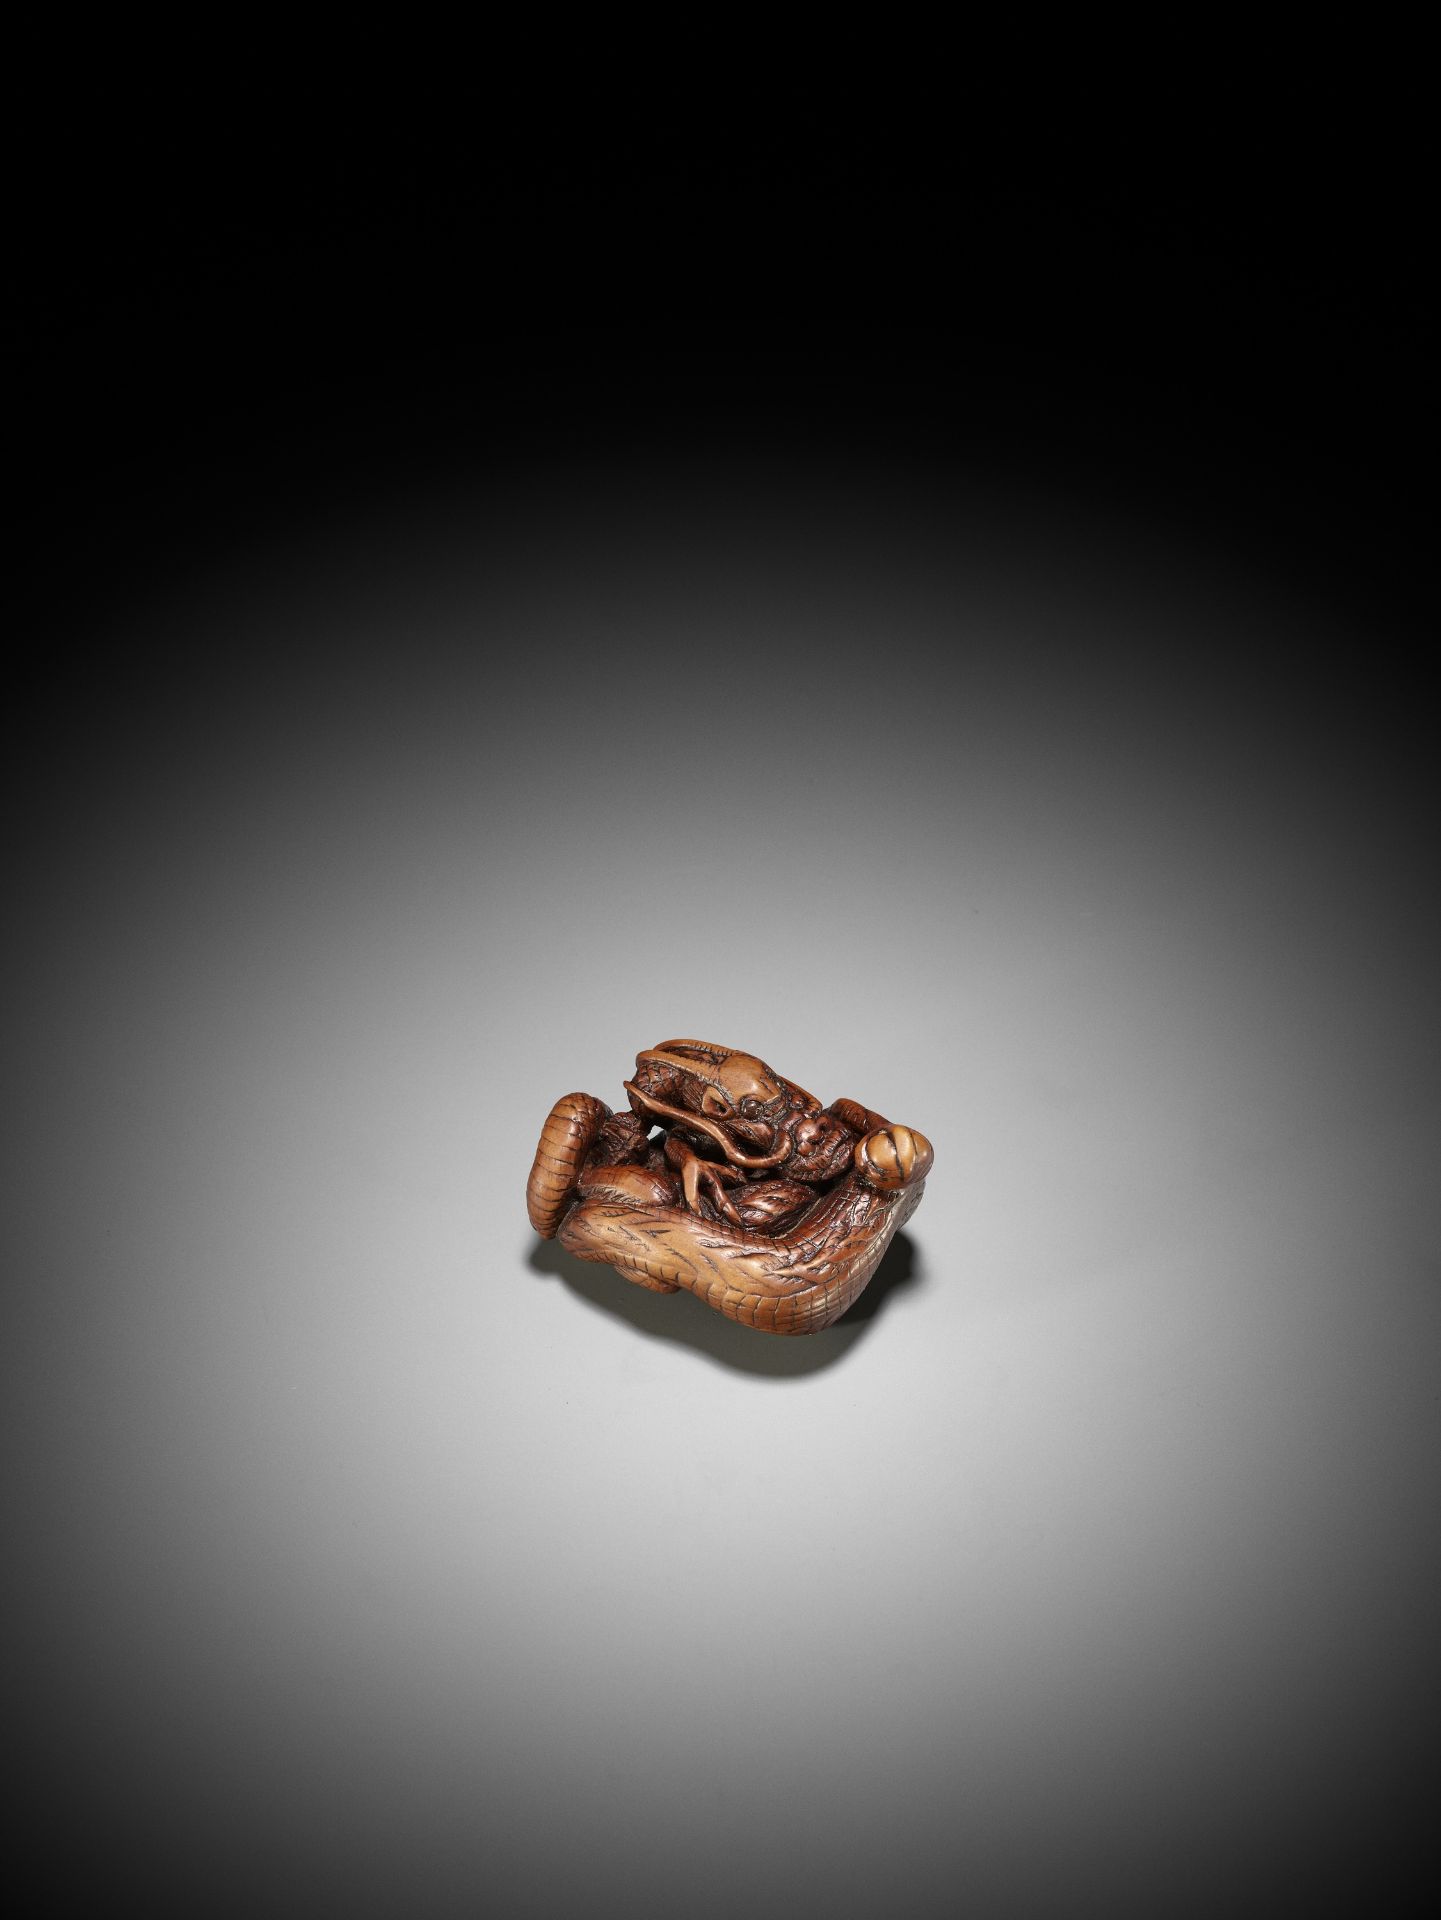 A SUPERB WOOD NETSUKE OF A COILED DRAGON - Image 12 of 14